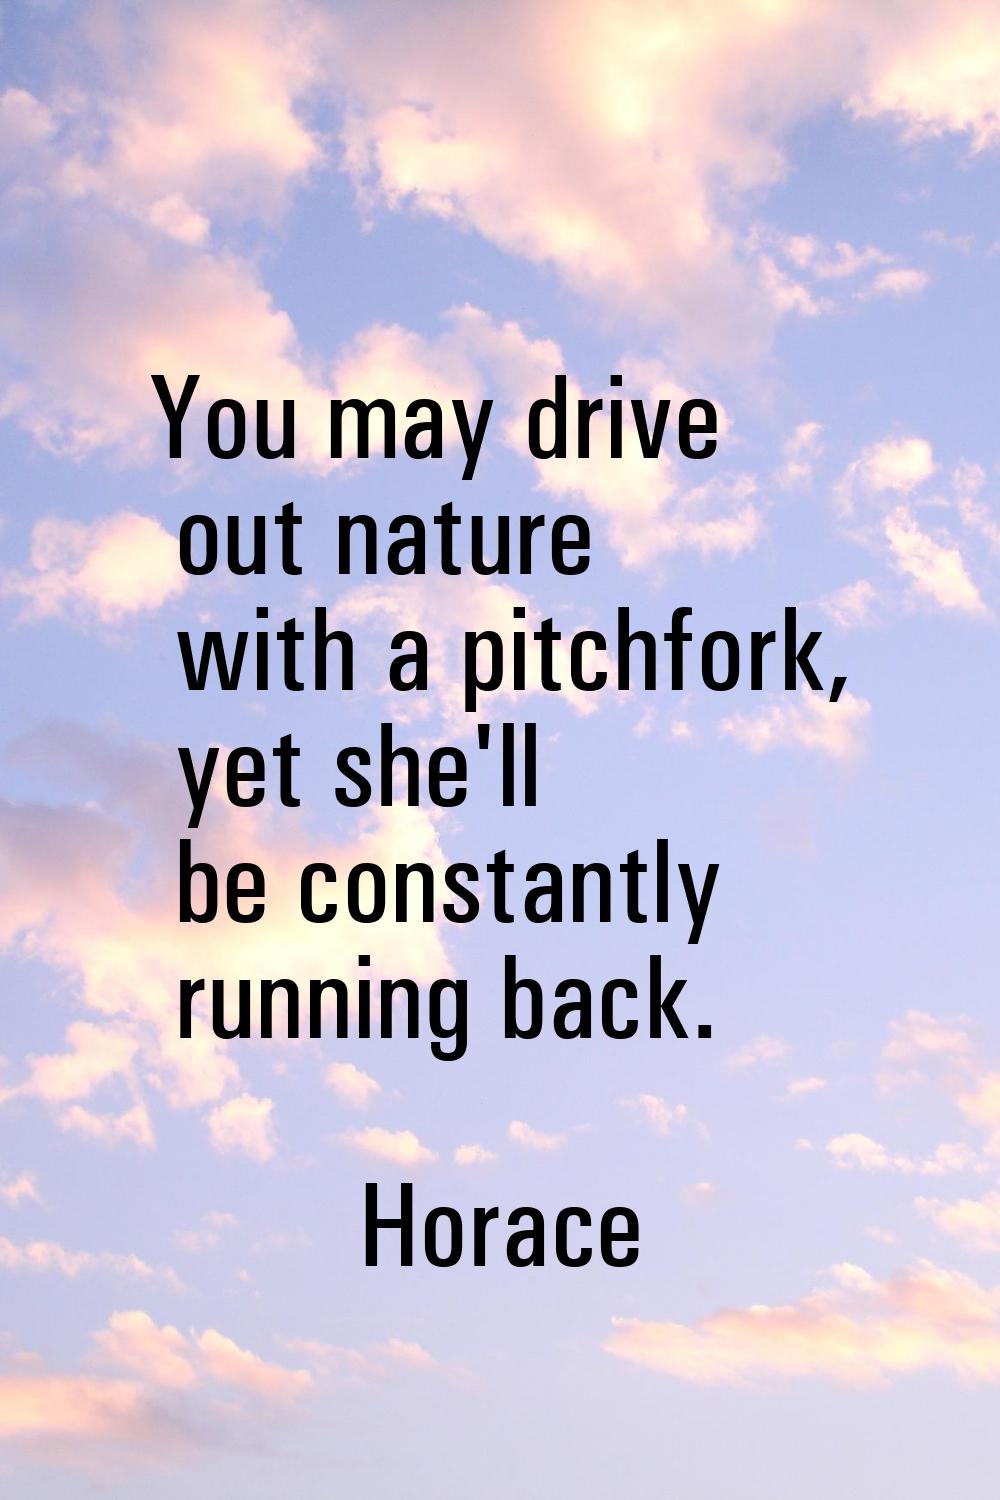 You may drive out nature with a pitchfork, yet she'll be constantly running back.